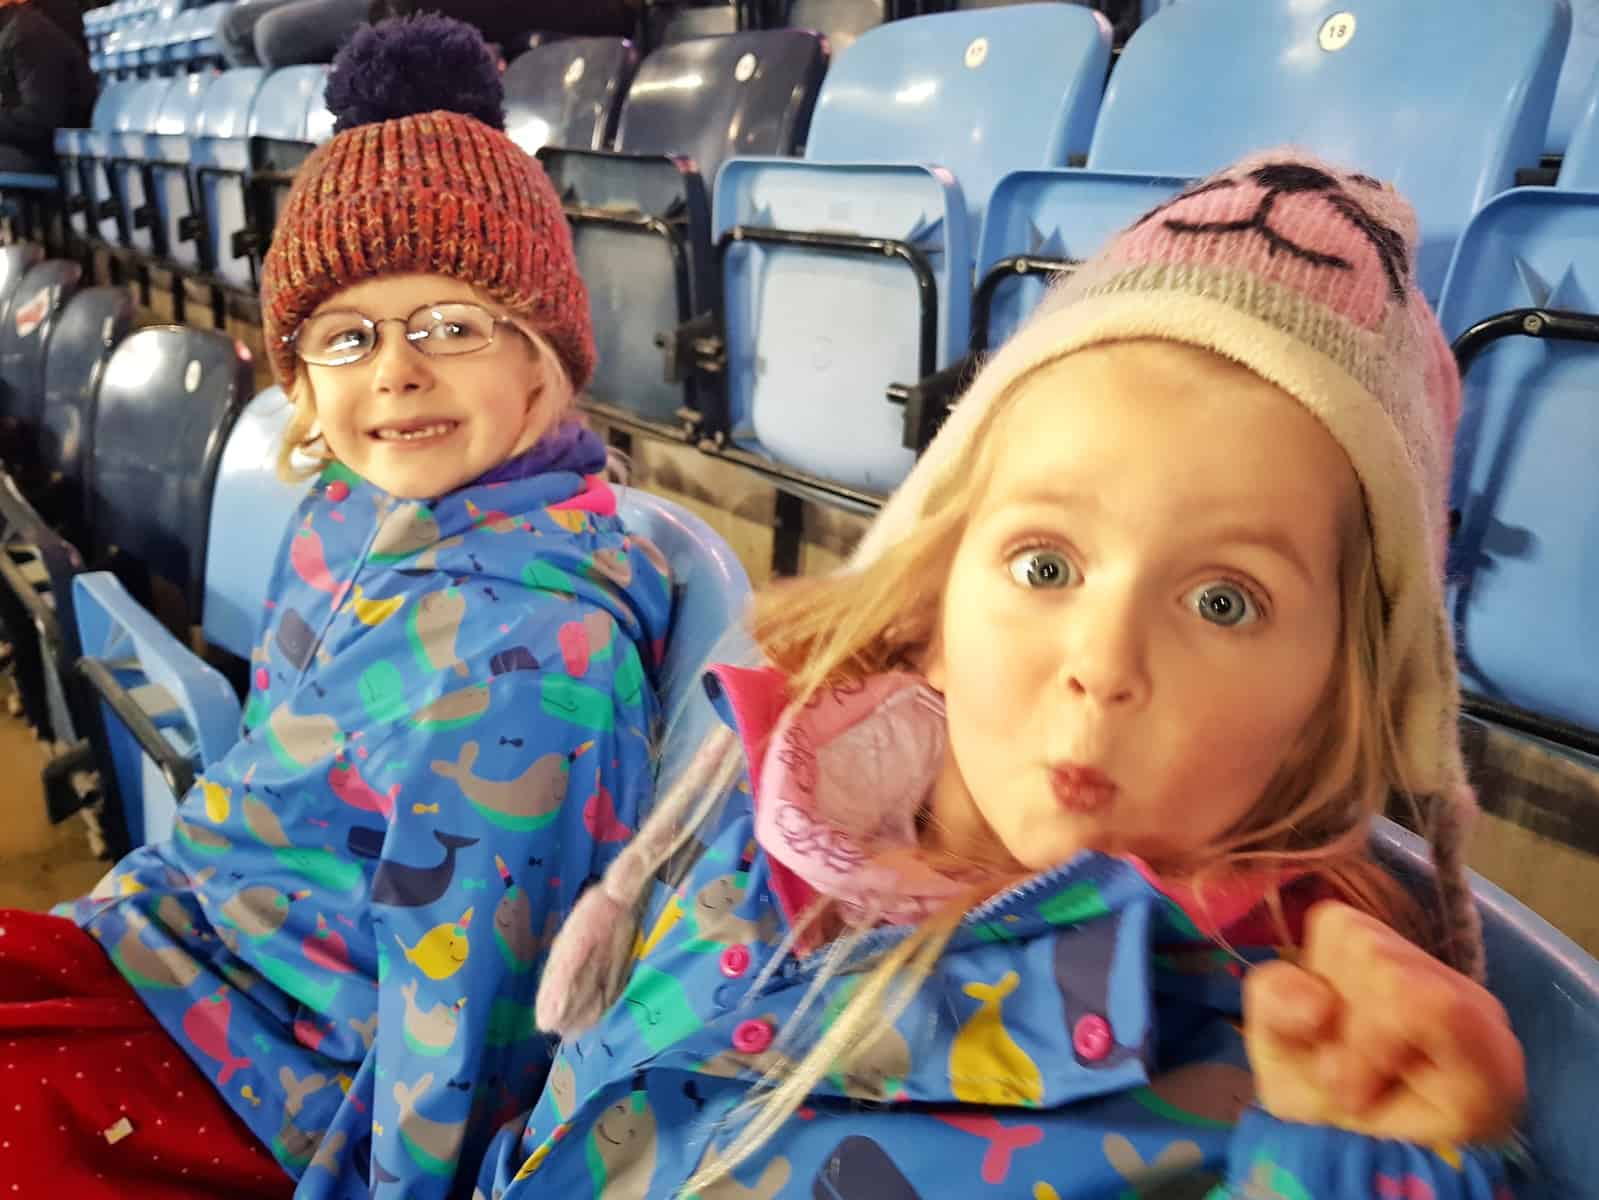 A family day out at the rugby watching Wasps at Ricoh Arena